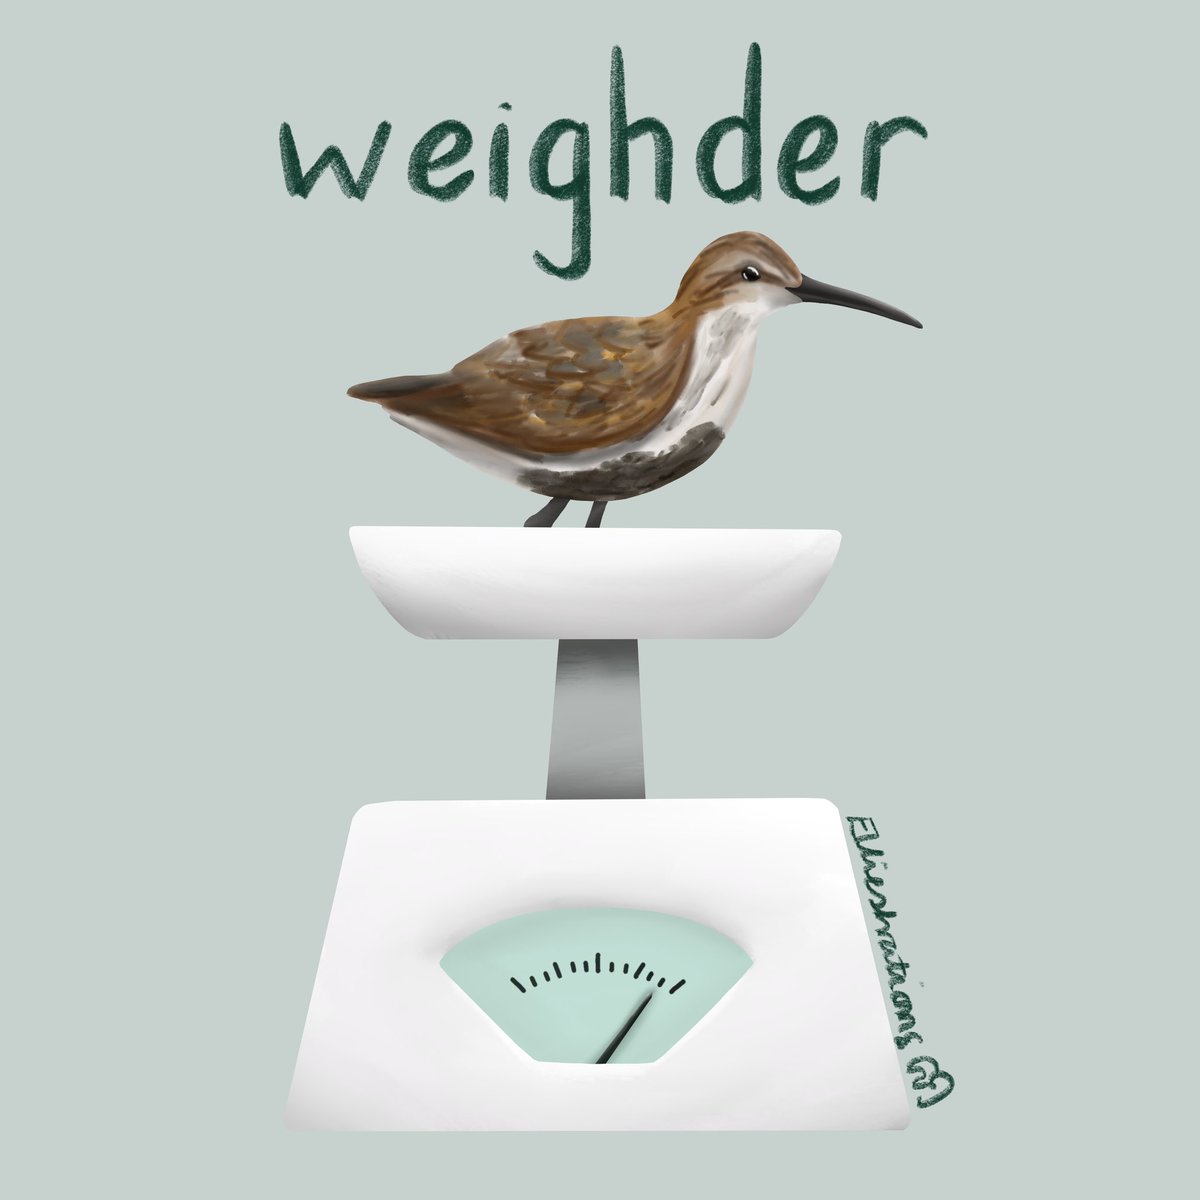 Another #WaderWednesday comes around 😍 looking forward to seeing all the wader pics! Sharing another older illustration today, but will try and get some new things drawn soon as my to do list is getting quite long!! #BirdTwitter #Waders #Birds #Illustration